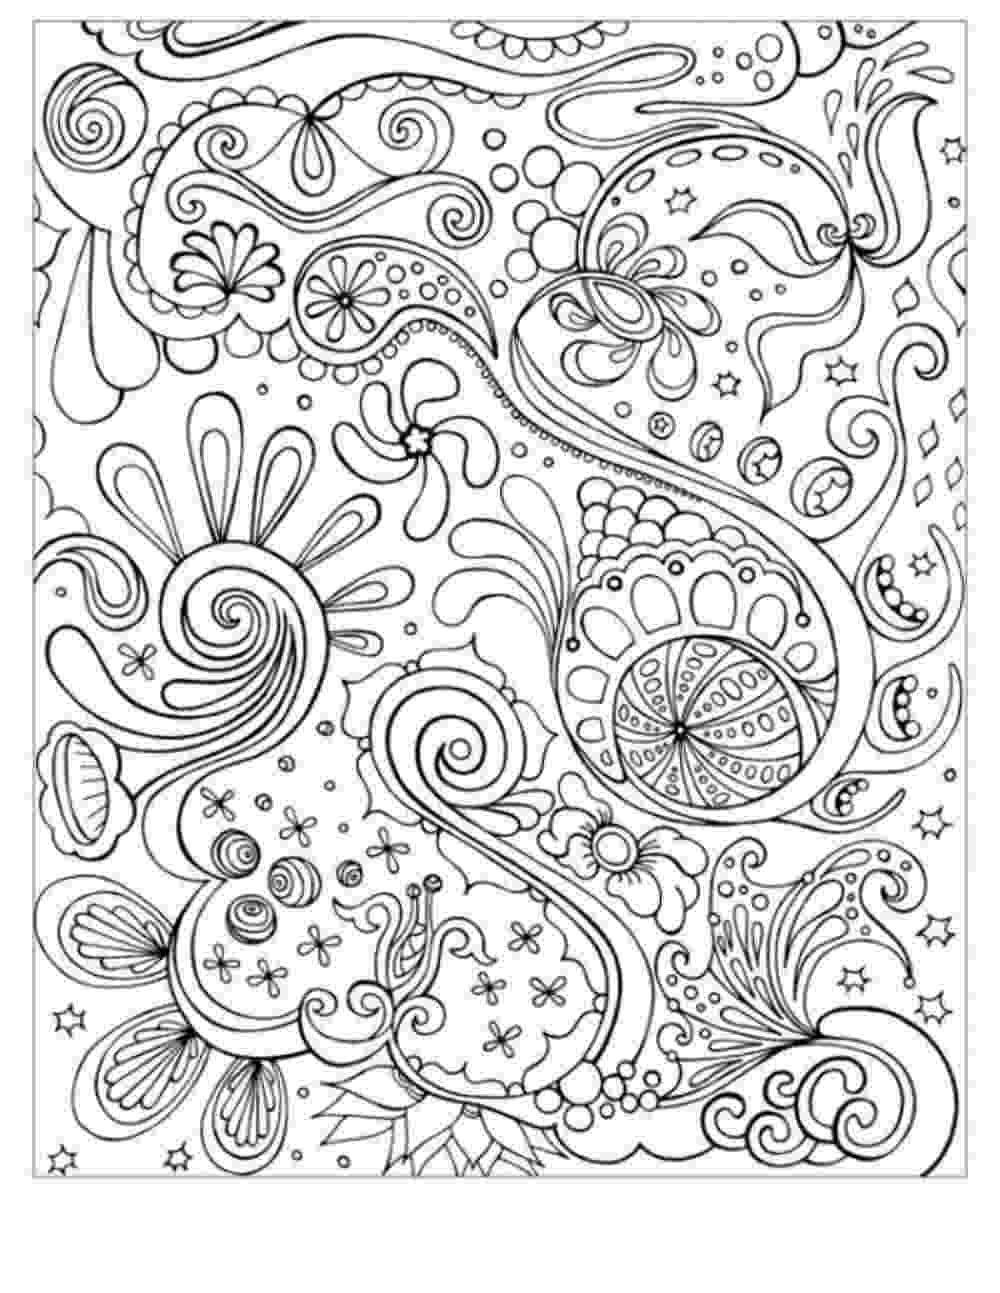 colouring pages adults online free abstract coloring pages for adults coloring home free adults colouring pages online 